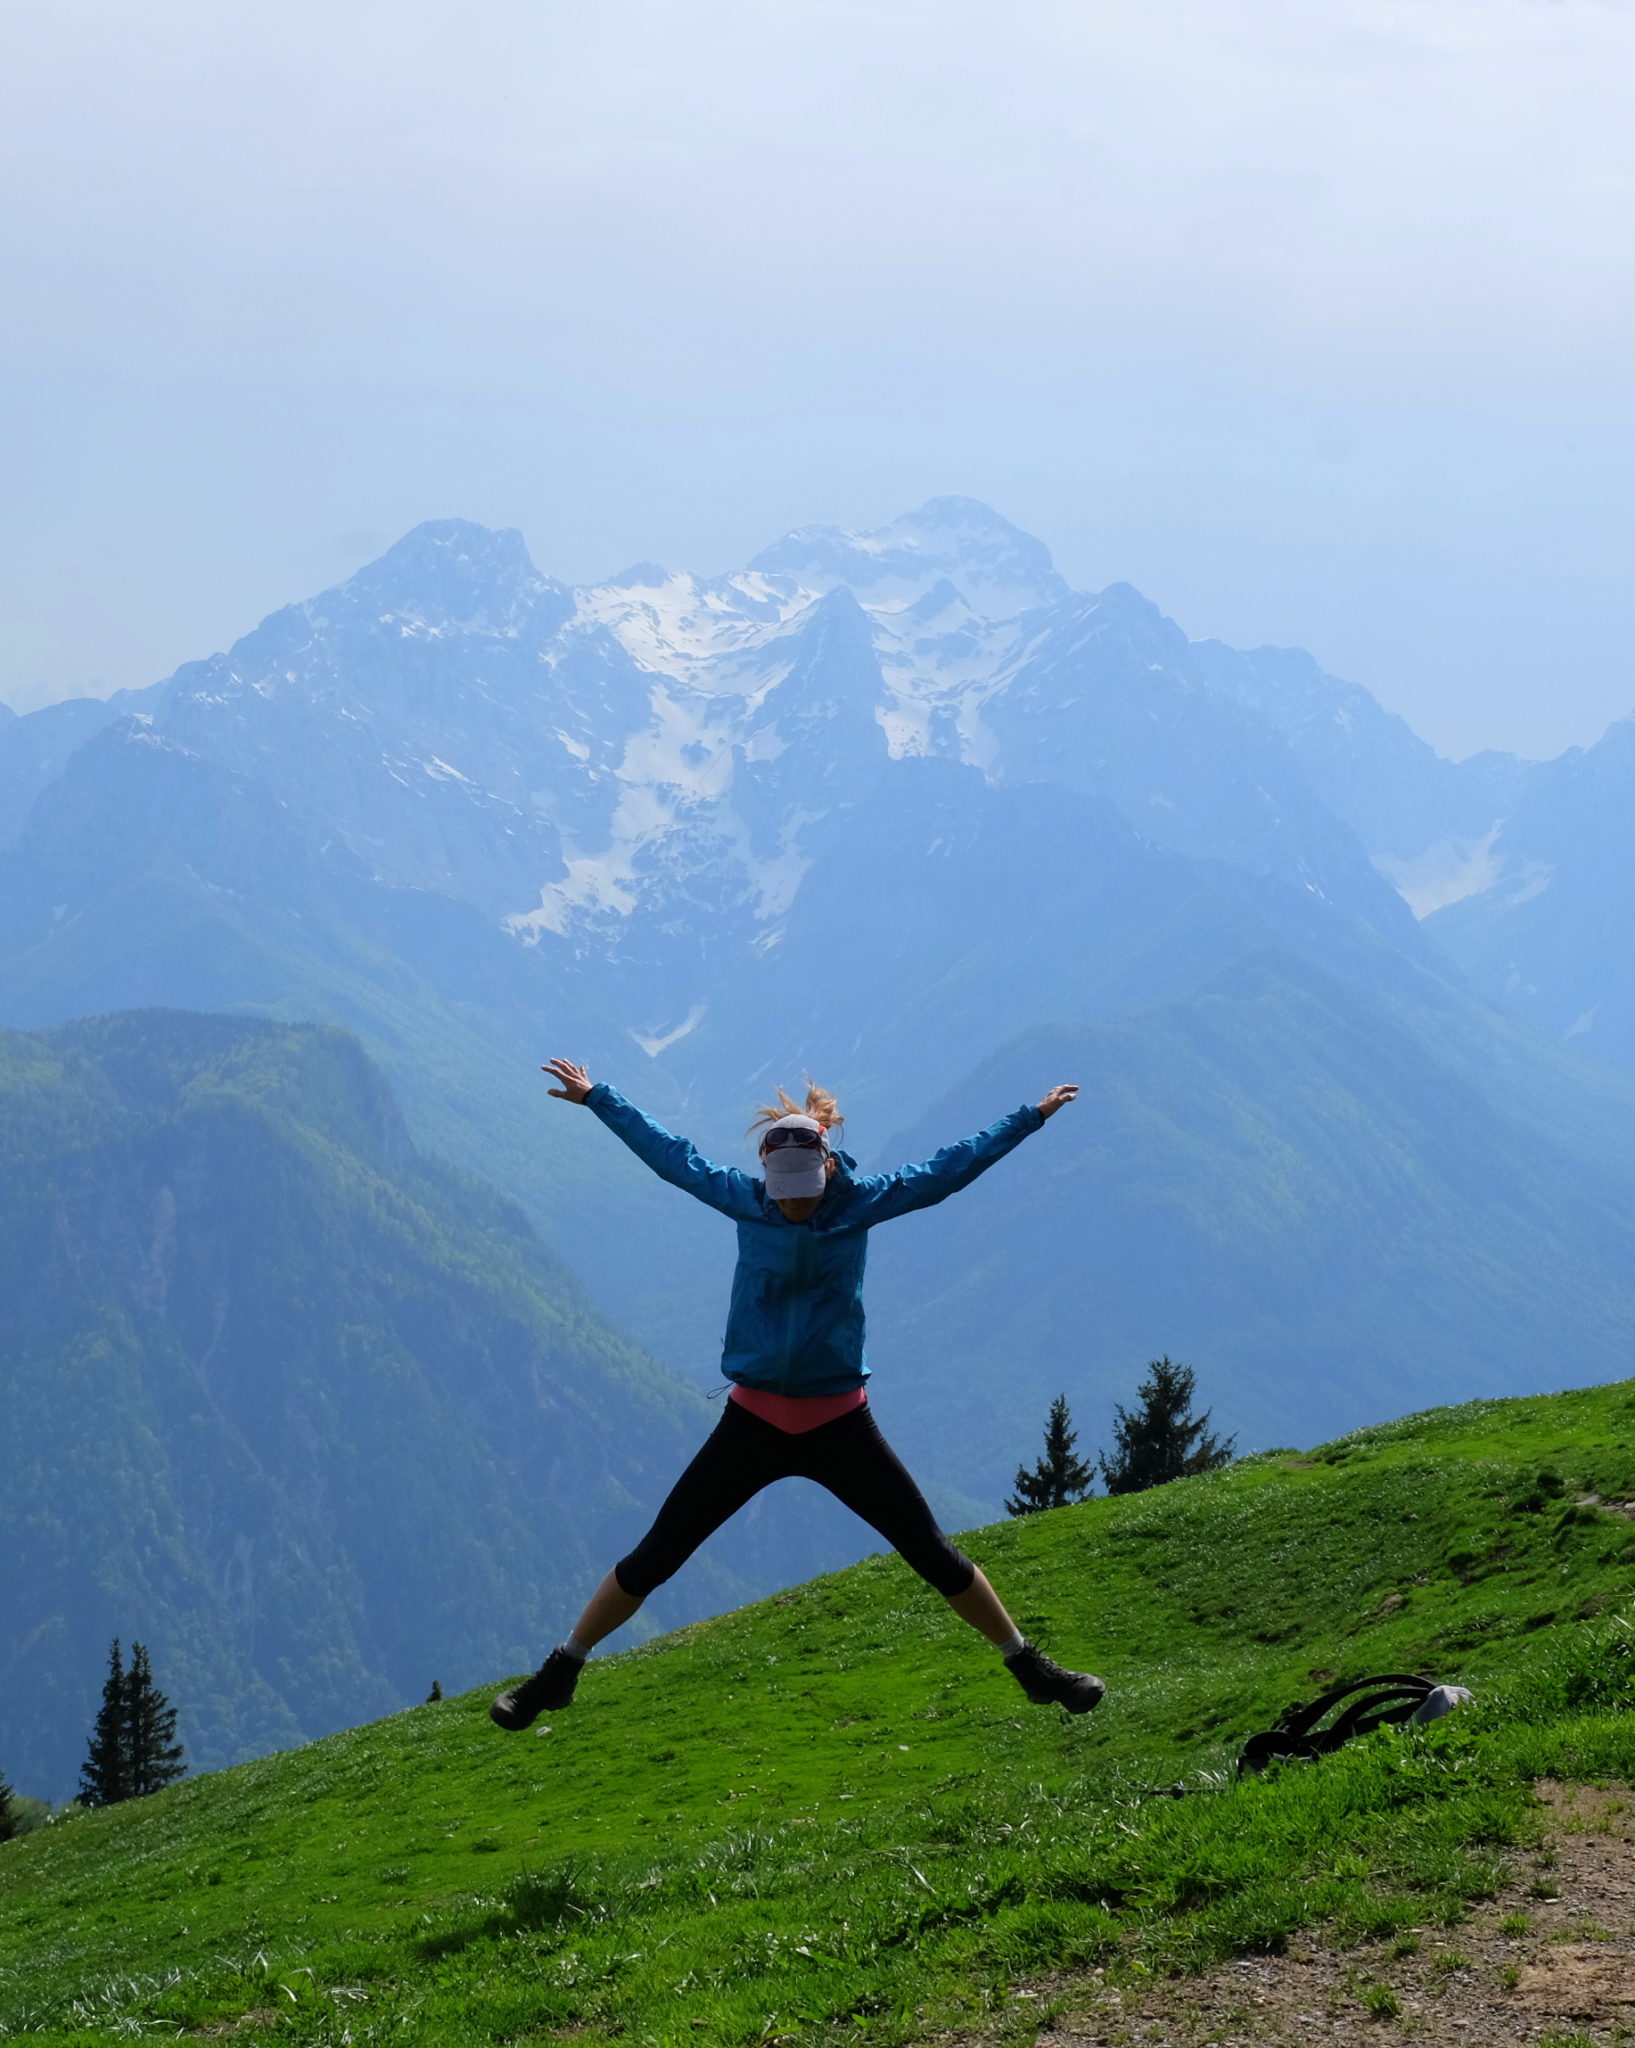 A female hiker jumping from joy in the mountains